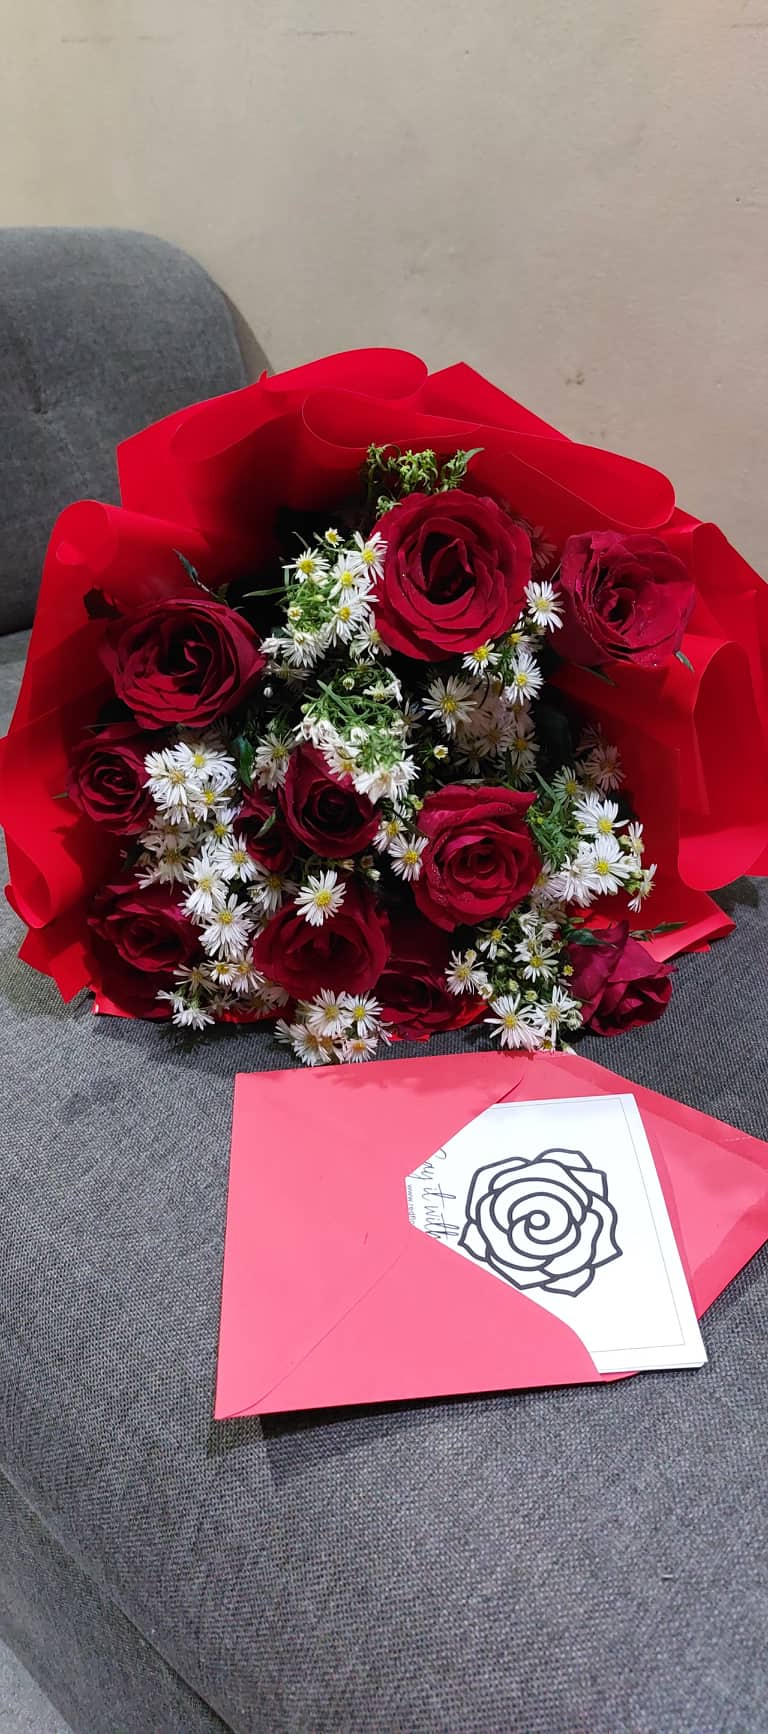 12 red roses bouquet